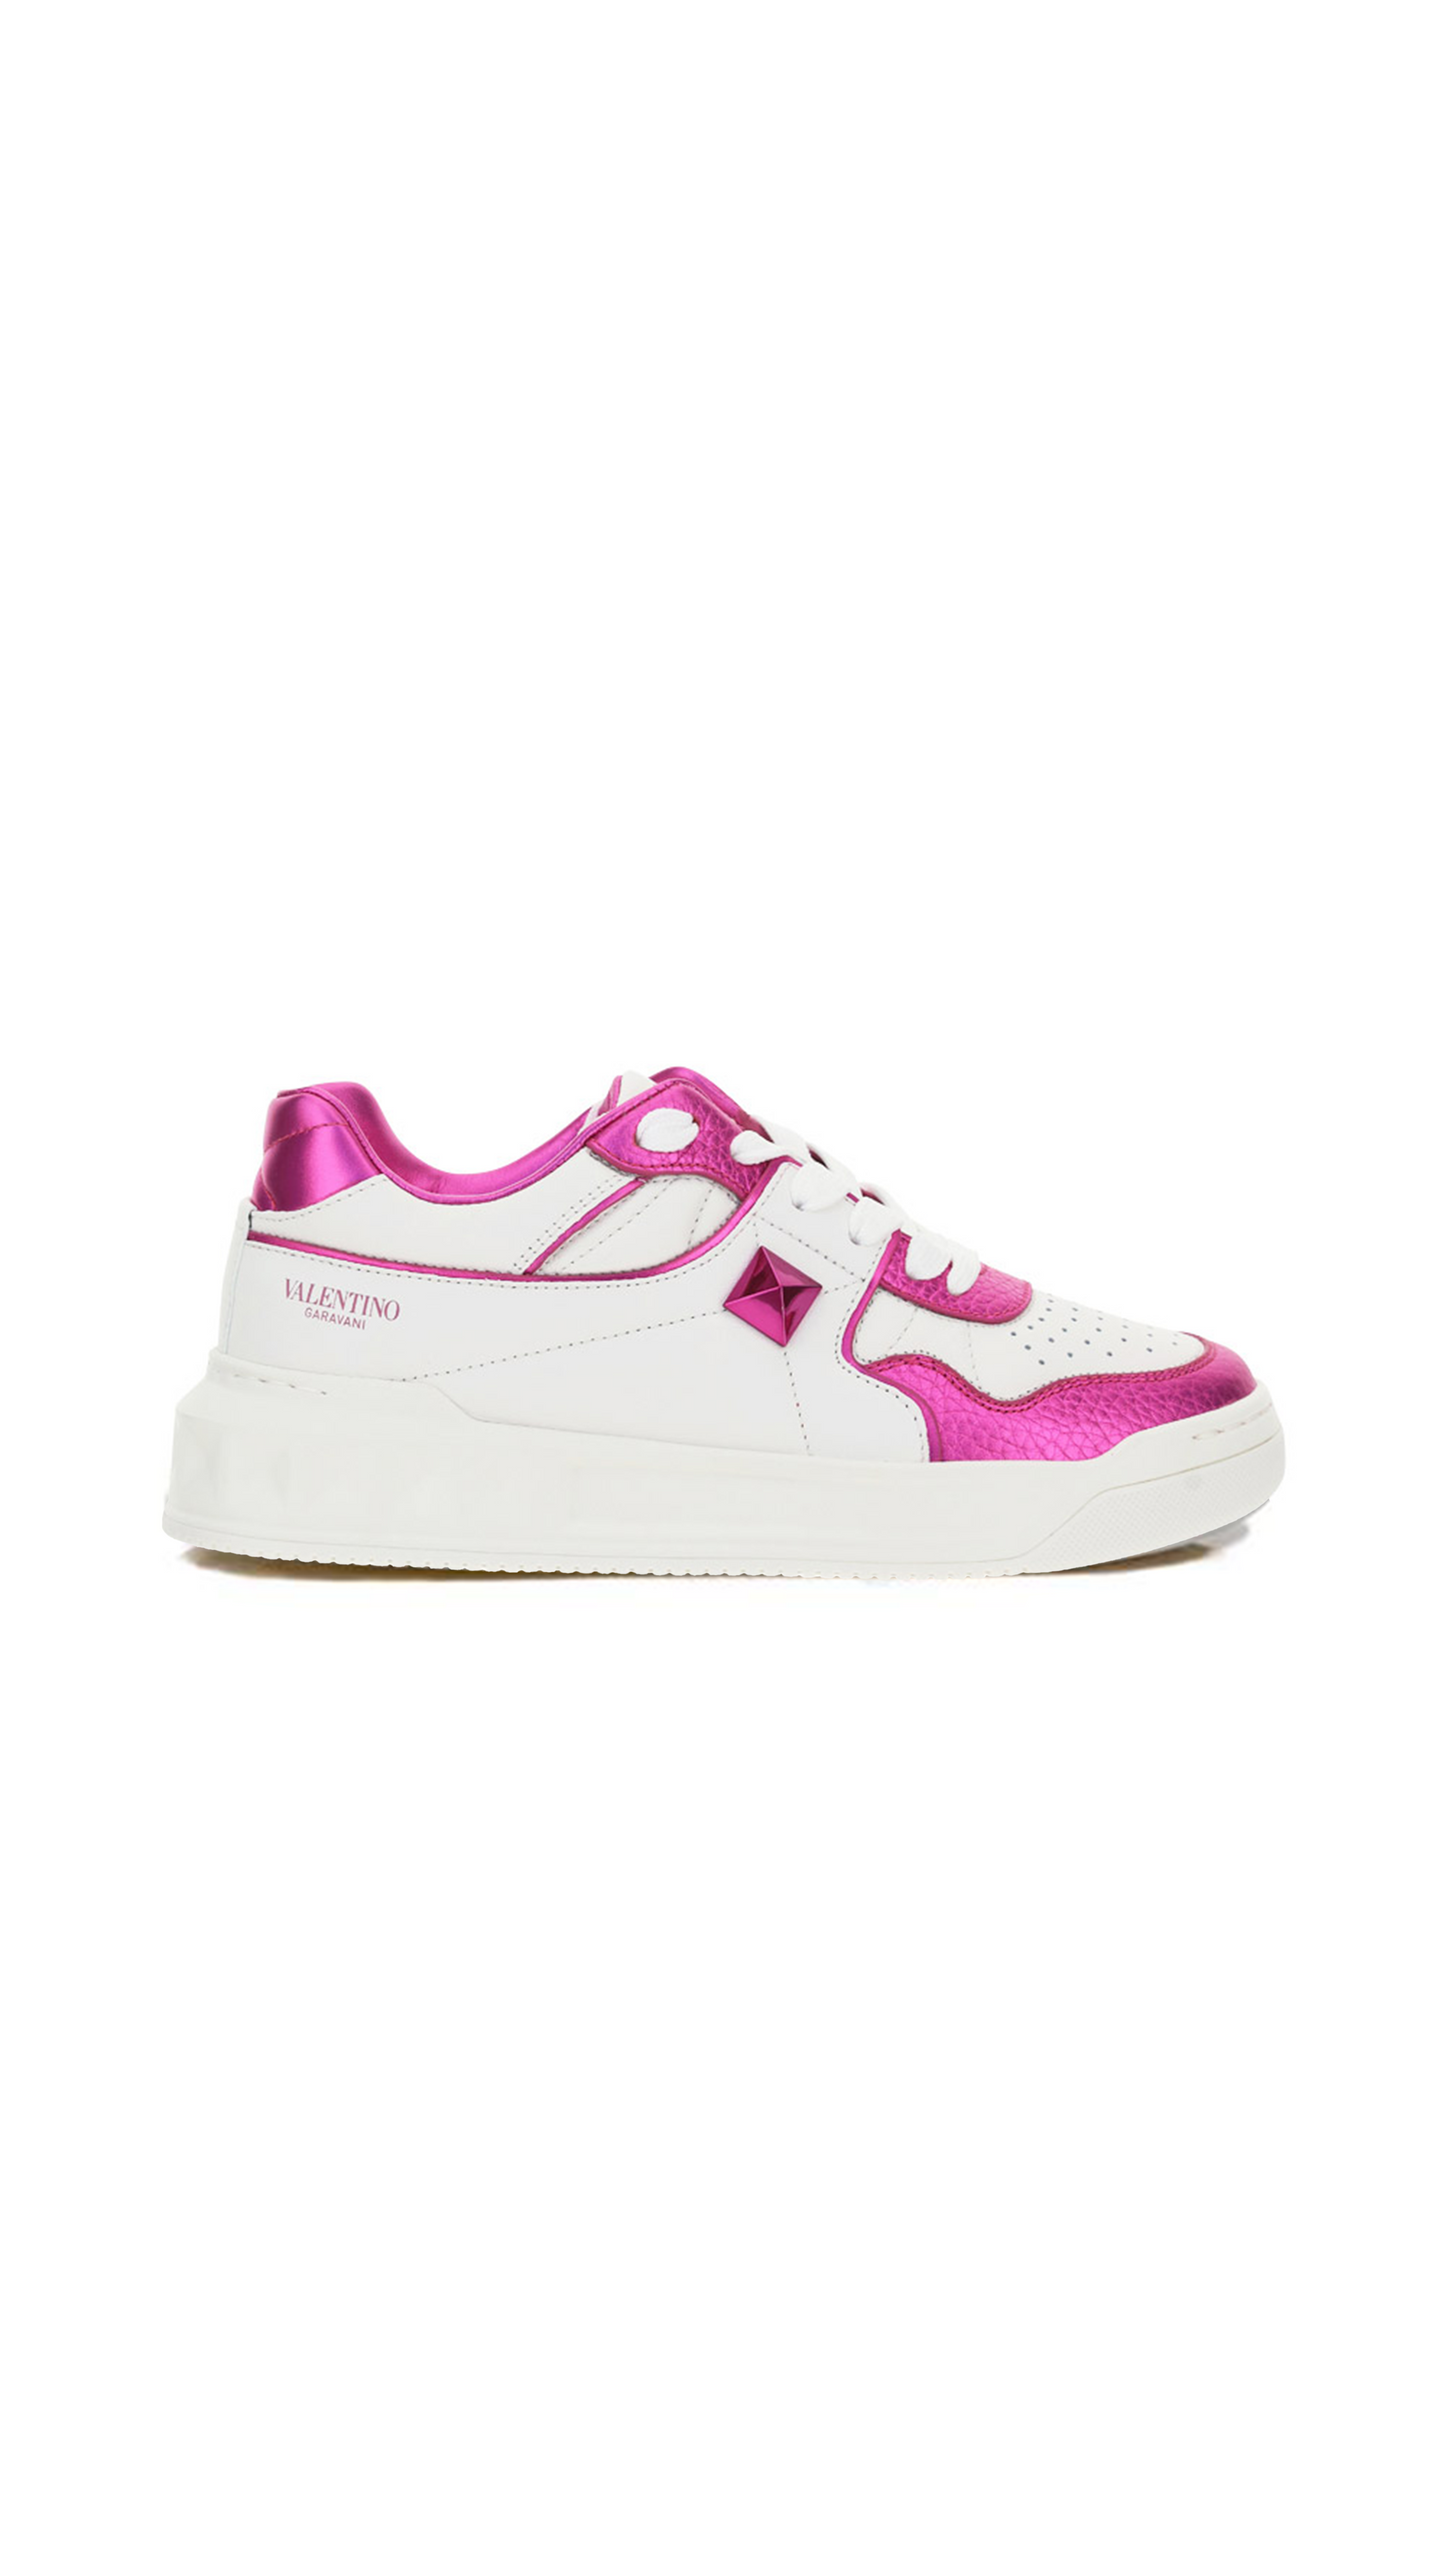 One Stud Low-Top Nappa Sneaker With Metallic Details - Pink / White